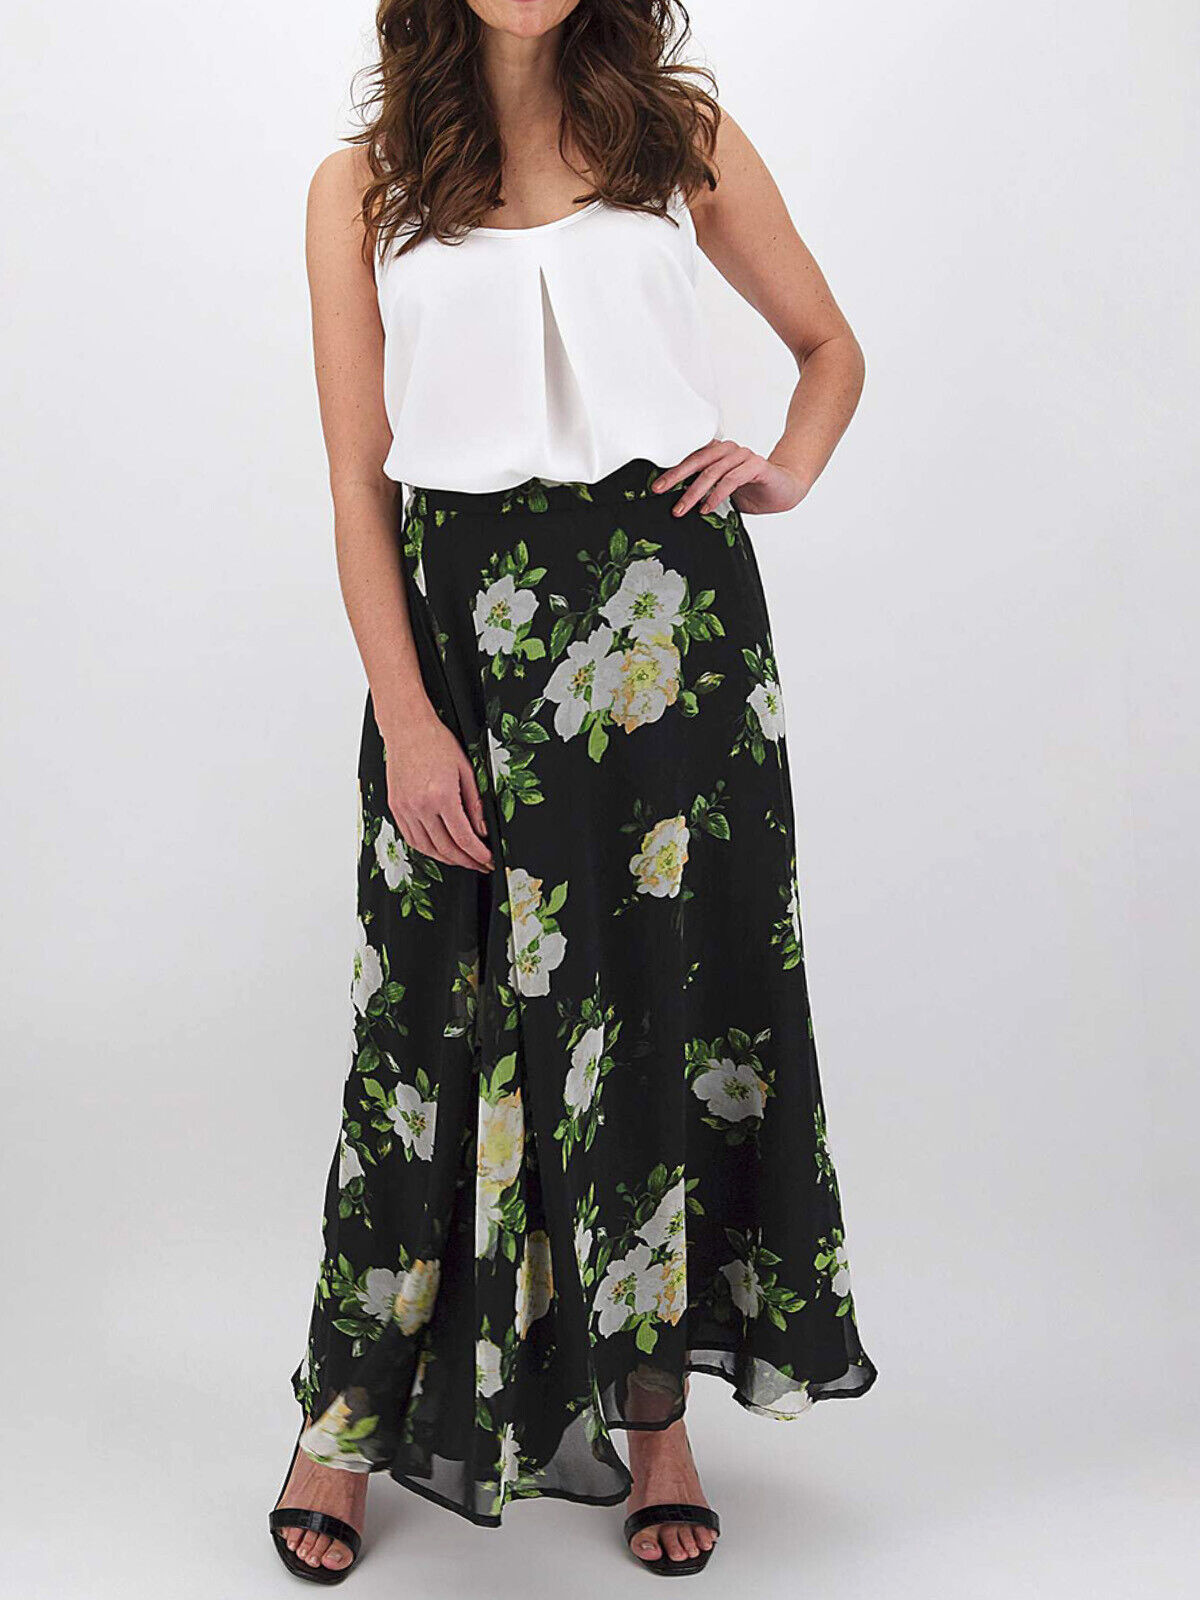 JD Williams Black/Ivory Floral Print Georgette Maxi Skirt Sizes 12 or 14